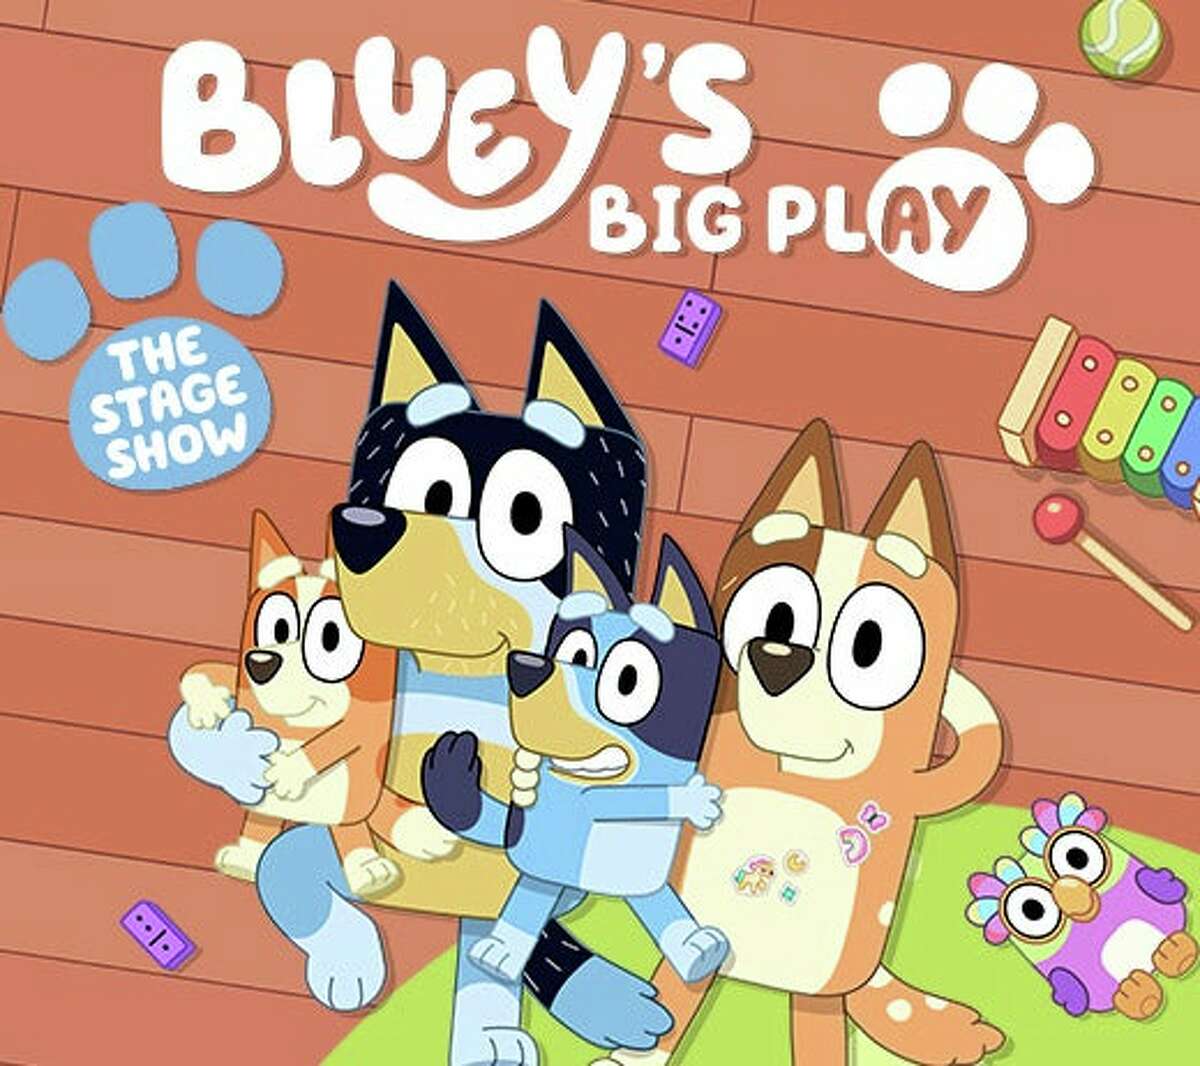 Popular Disney show "Bluey" will come to the Fox Theatre in St. Louis next year. 